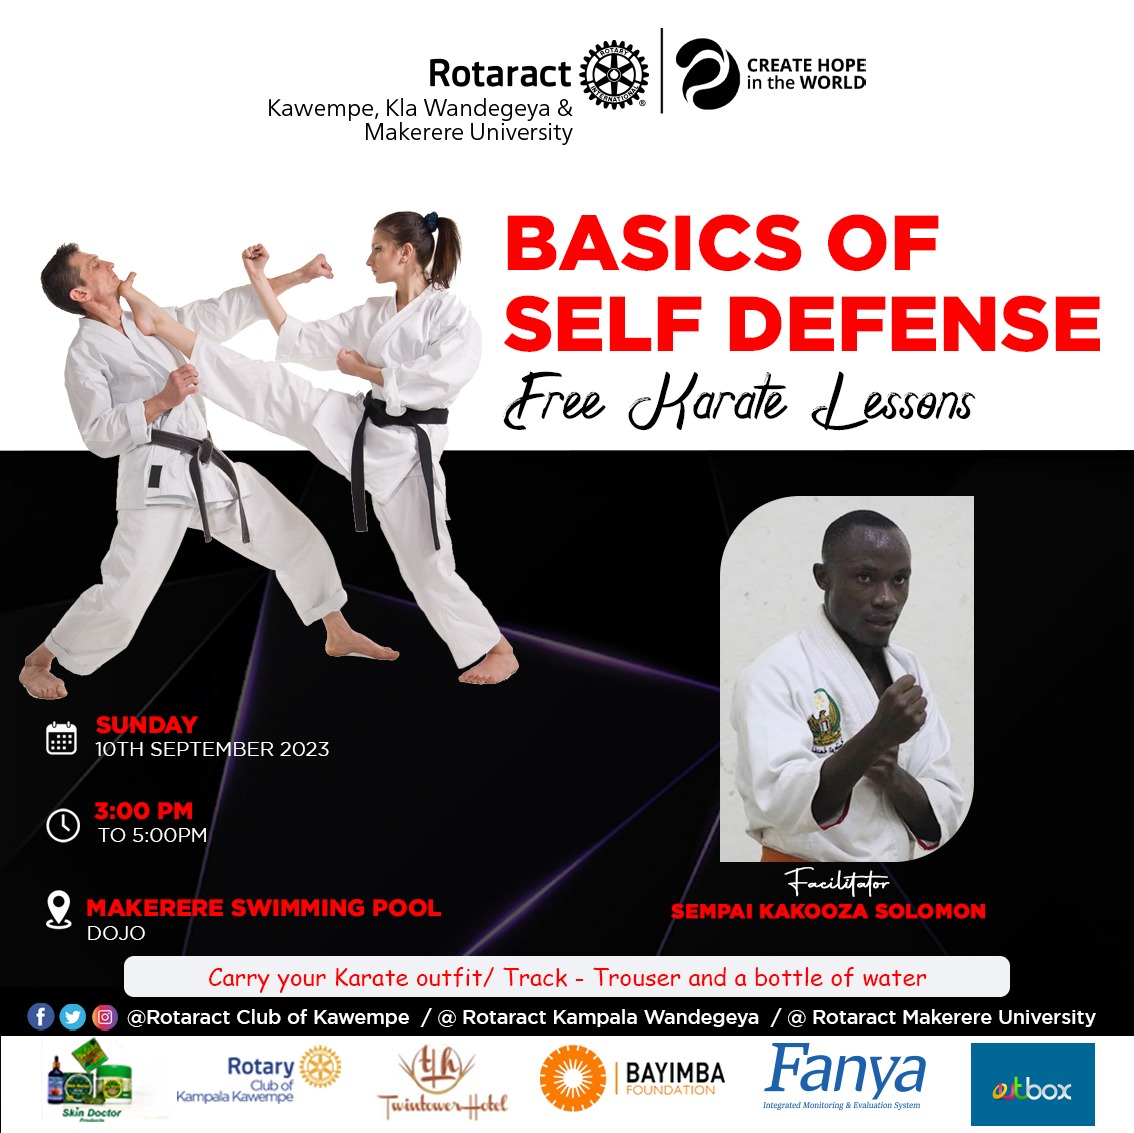 Self defense is not just a set of techniques, it's a state of mind that begins with the belief that you are worth defending
Great results can be achieved with small forces
Join us this Sunday we we take you thru basics of Self defense
#VikingsCreatingHope 
#CreatingHopeInTheWorld